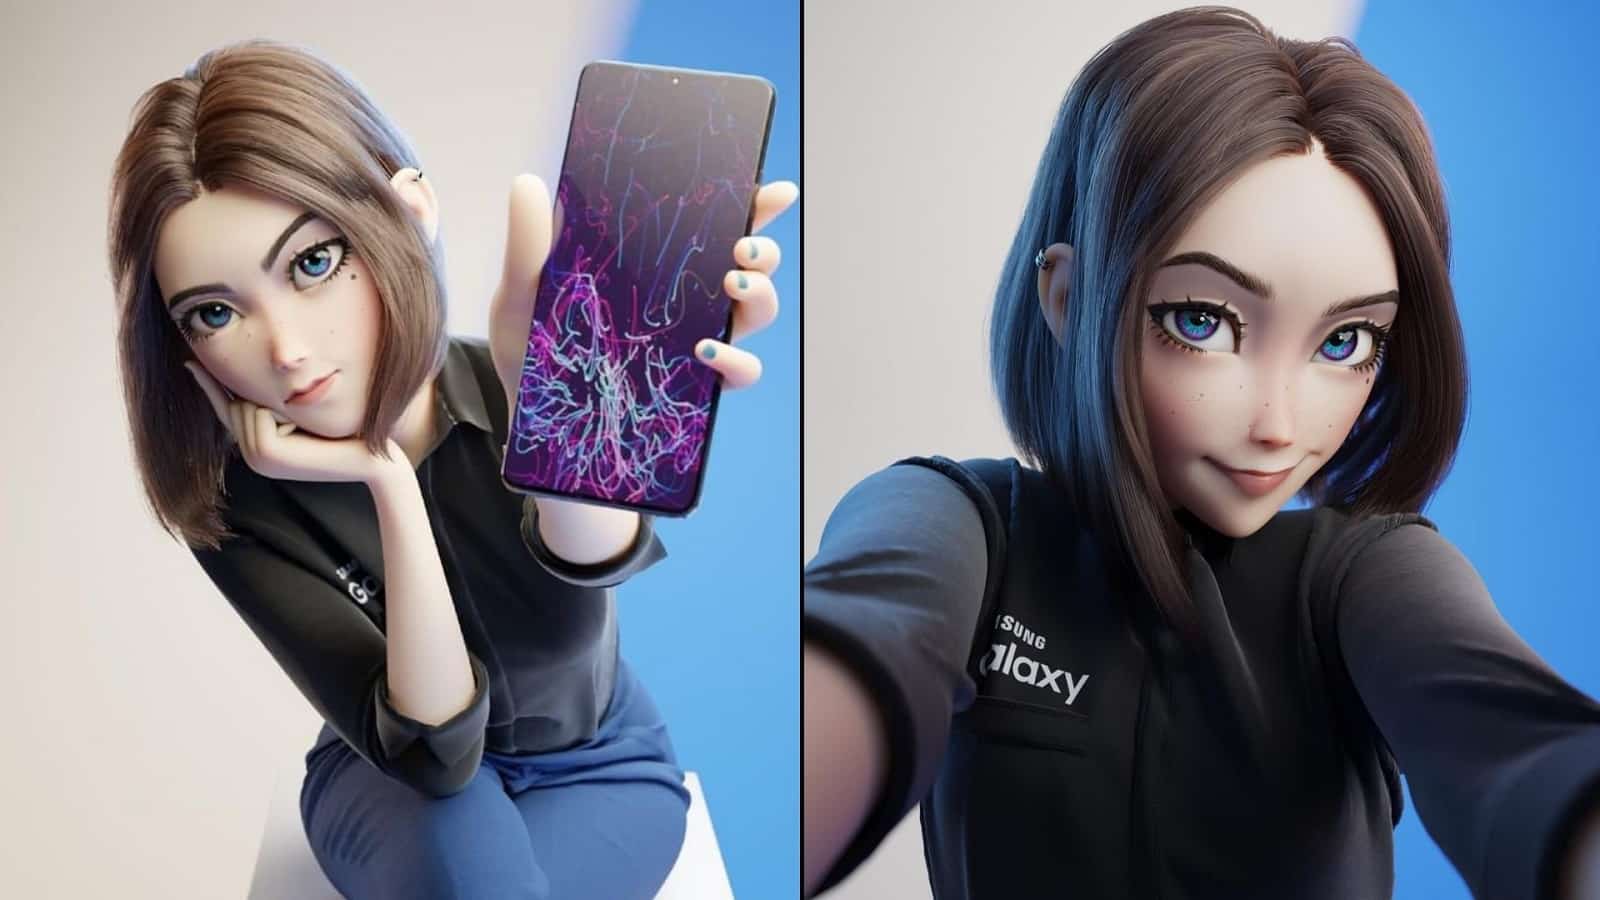 Who is Samsung Girl? New virtual mobile assistant goes viral